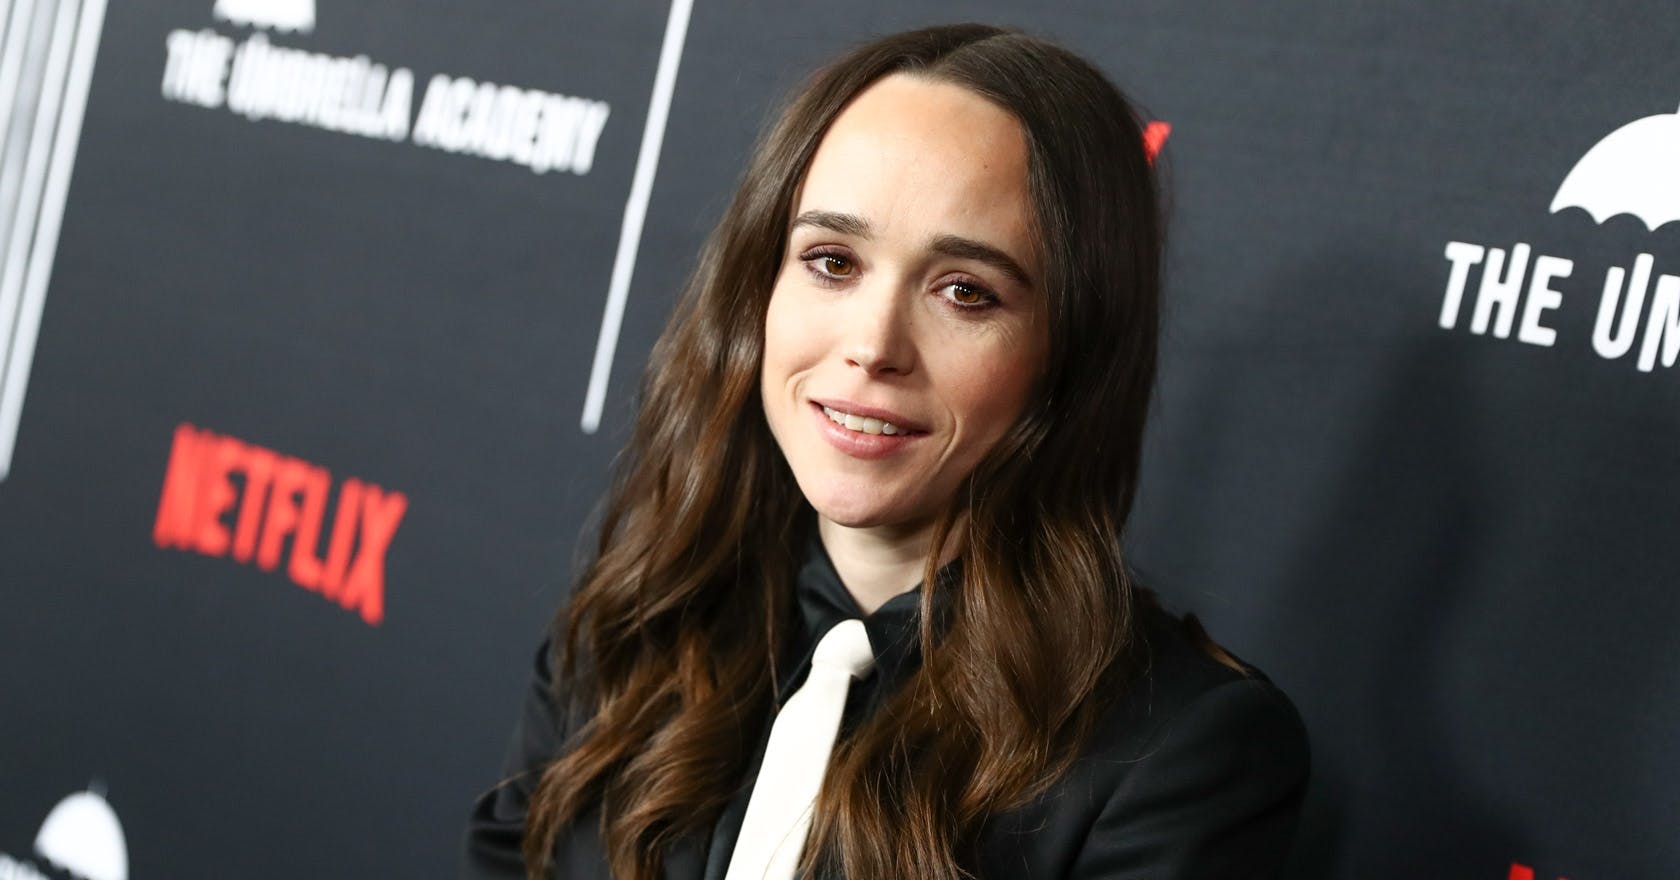 The Umbrella Academy's Ellen Page on cancel culture and diversity